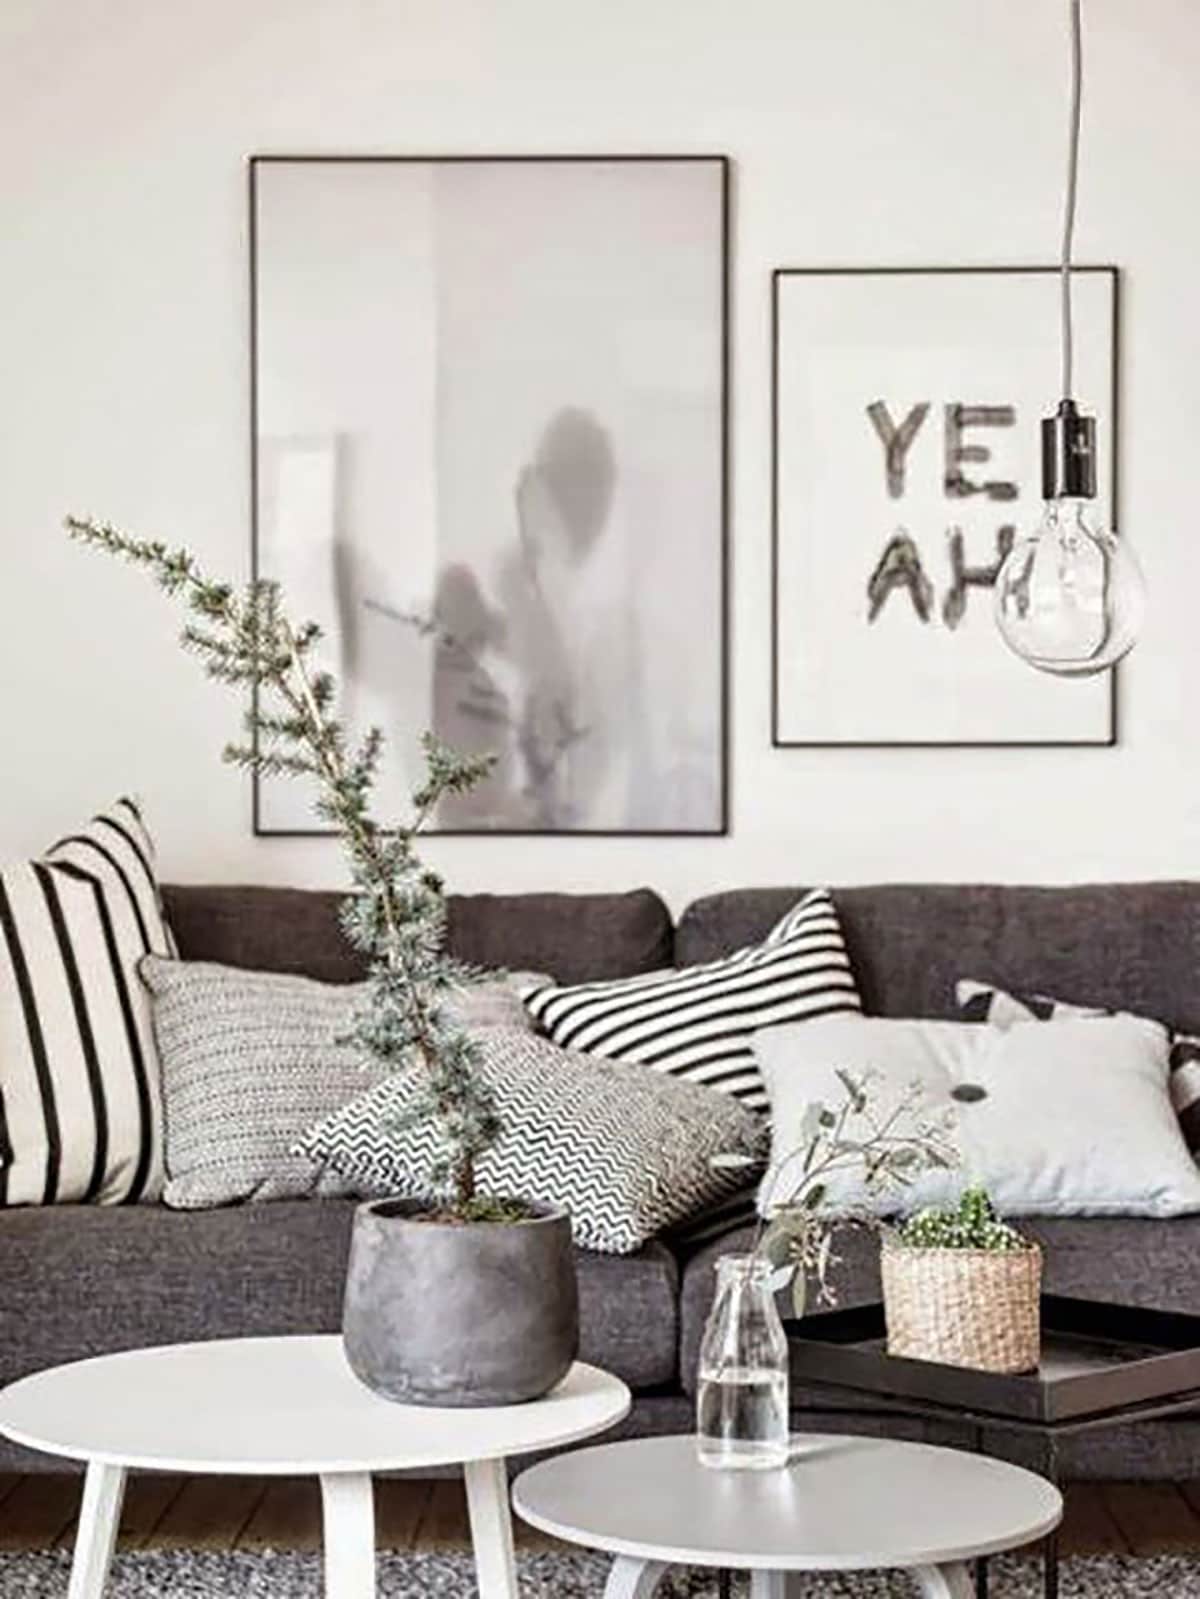 Designing with Texture - House Of Hipsters - Home Decor